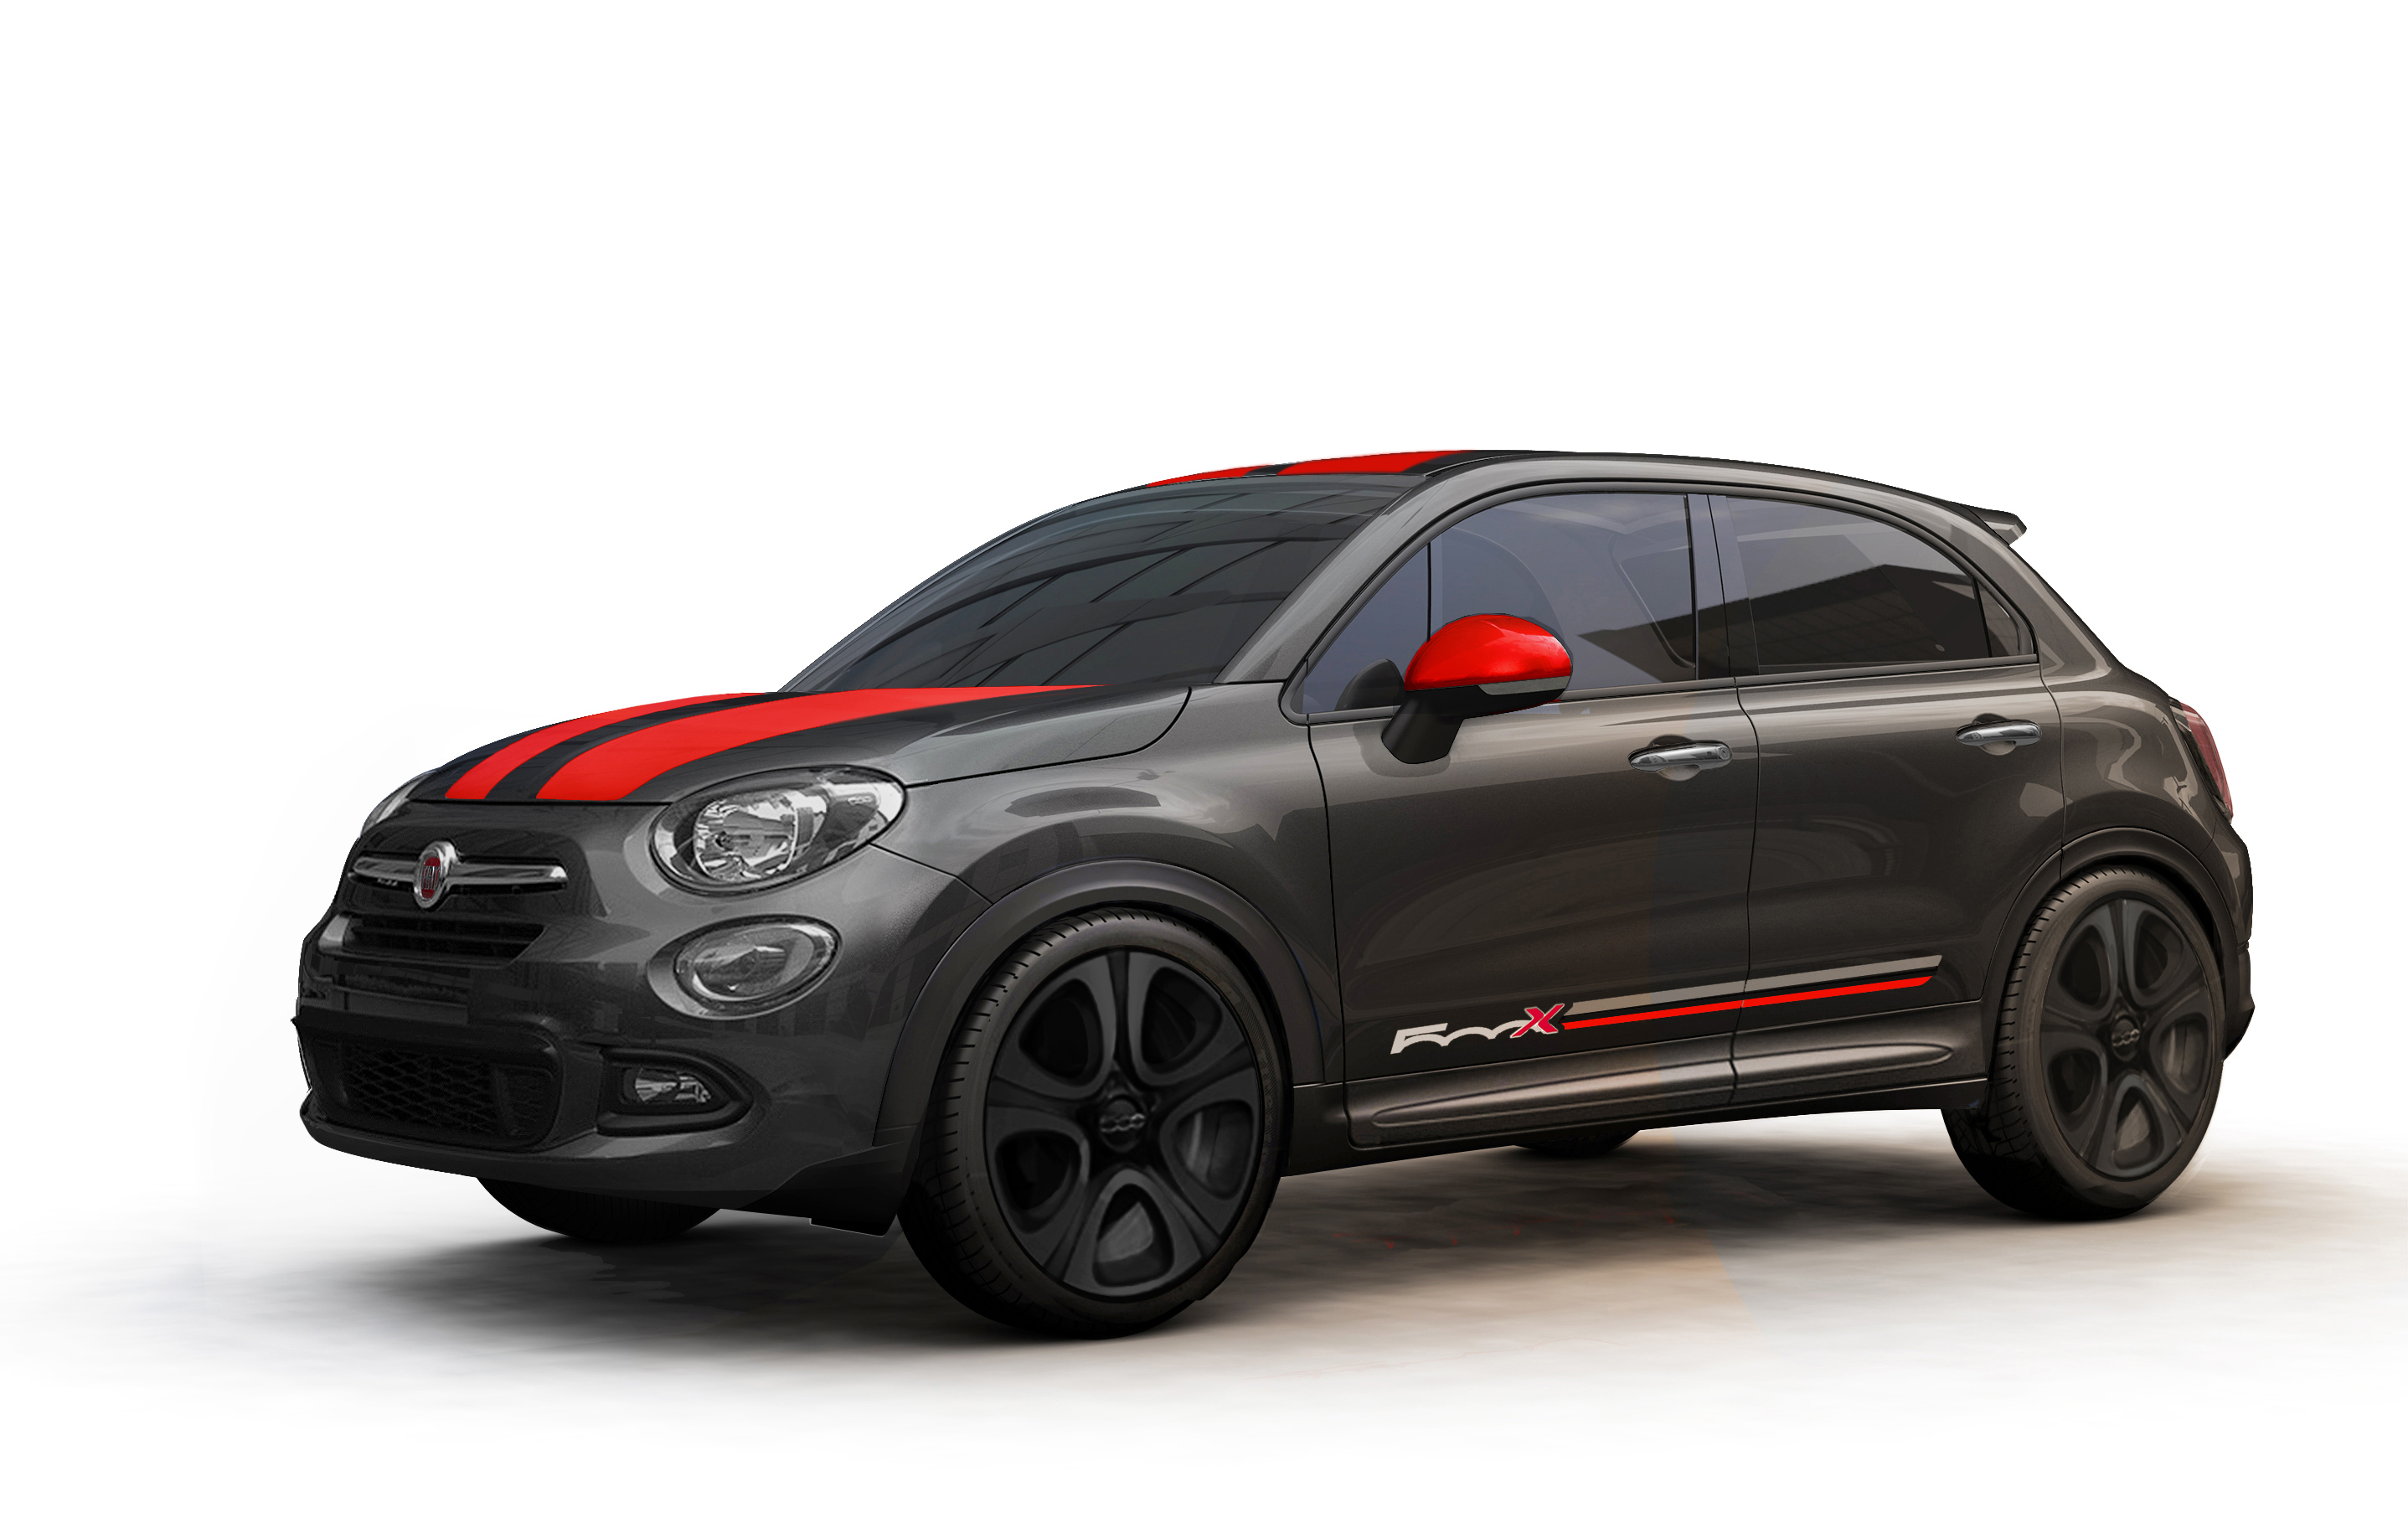 2016 Fiat 500X HD Background Wallpapers Attachment 9478   Grivucom